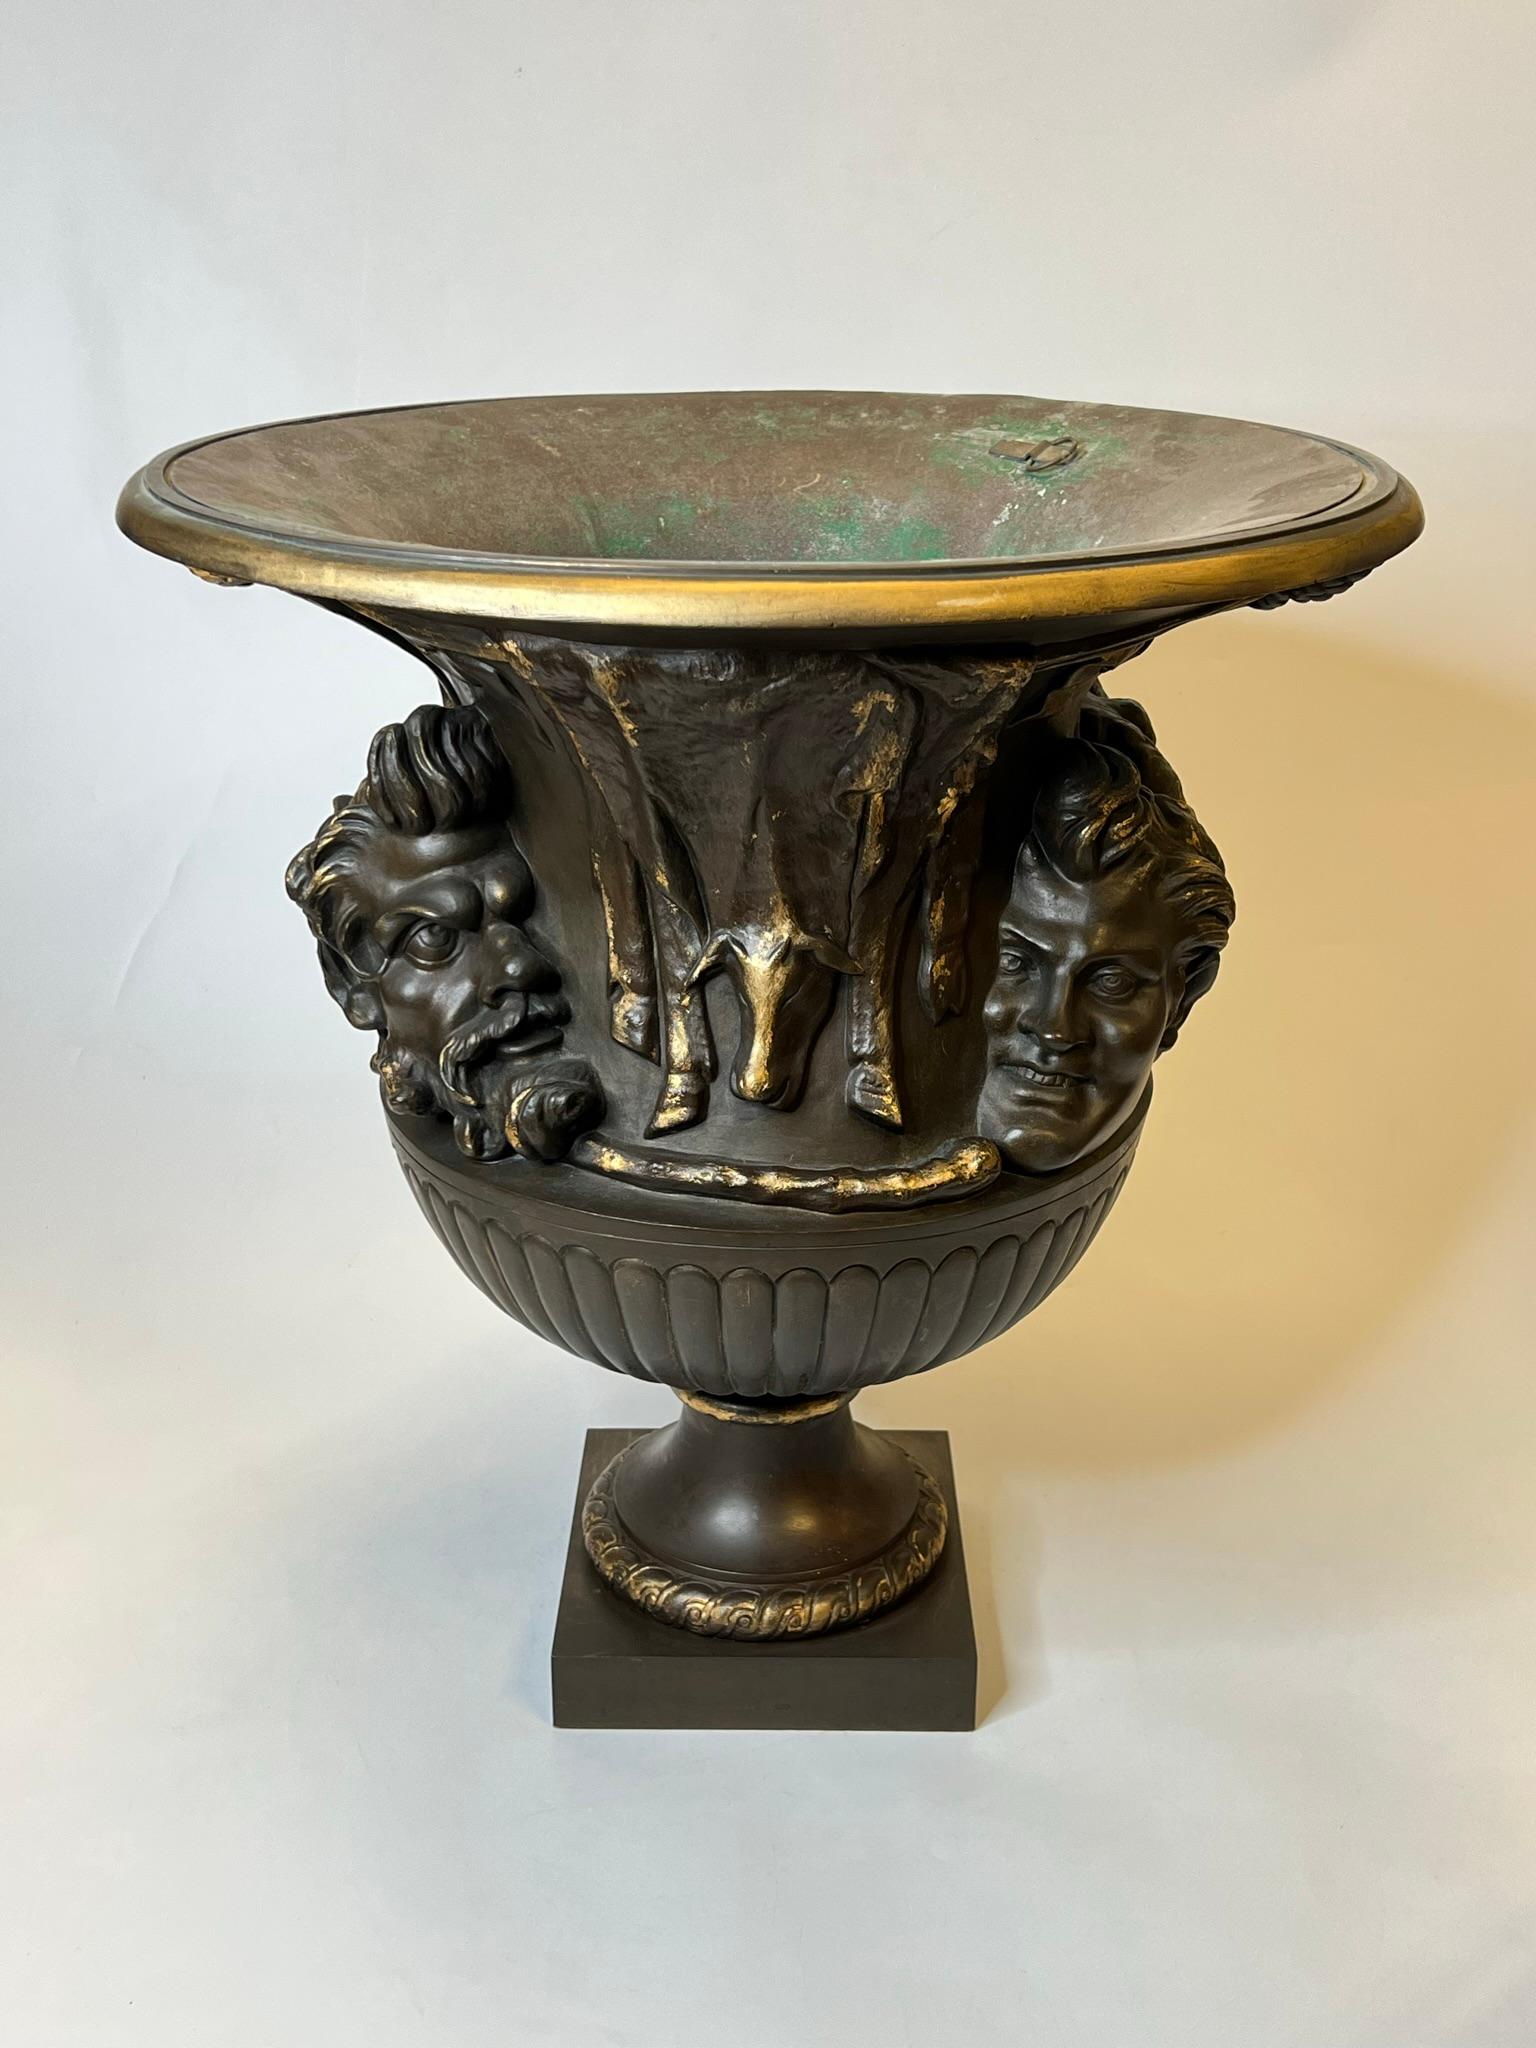 Neoclassical Revival Large 19th Century French Bronze Borghese Vase Cast by Barbedienne For Sale